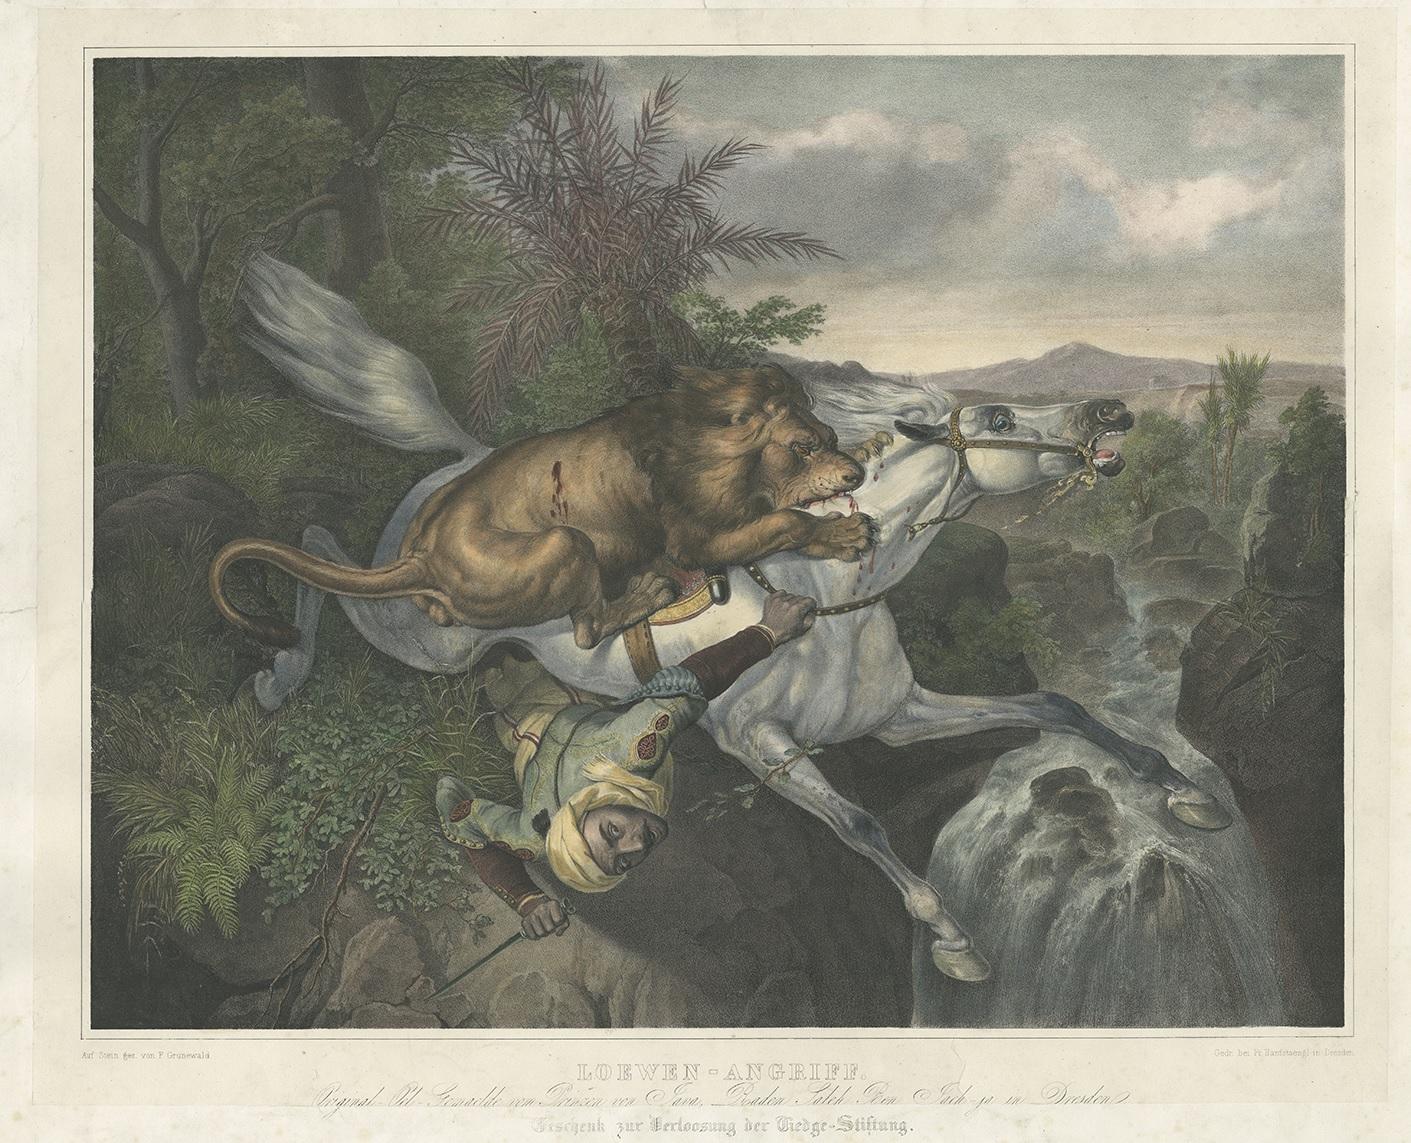 Antique print titled 'Loewen-Angriff'. Large print depicting a lion attacking a horse. Made after a painting by Raden Saleh. Raden Saleh Sjarif Boestaman was a pioneering Indonesian Romantic painter of Arab-Javanese ethnicity. He was considered to